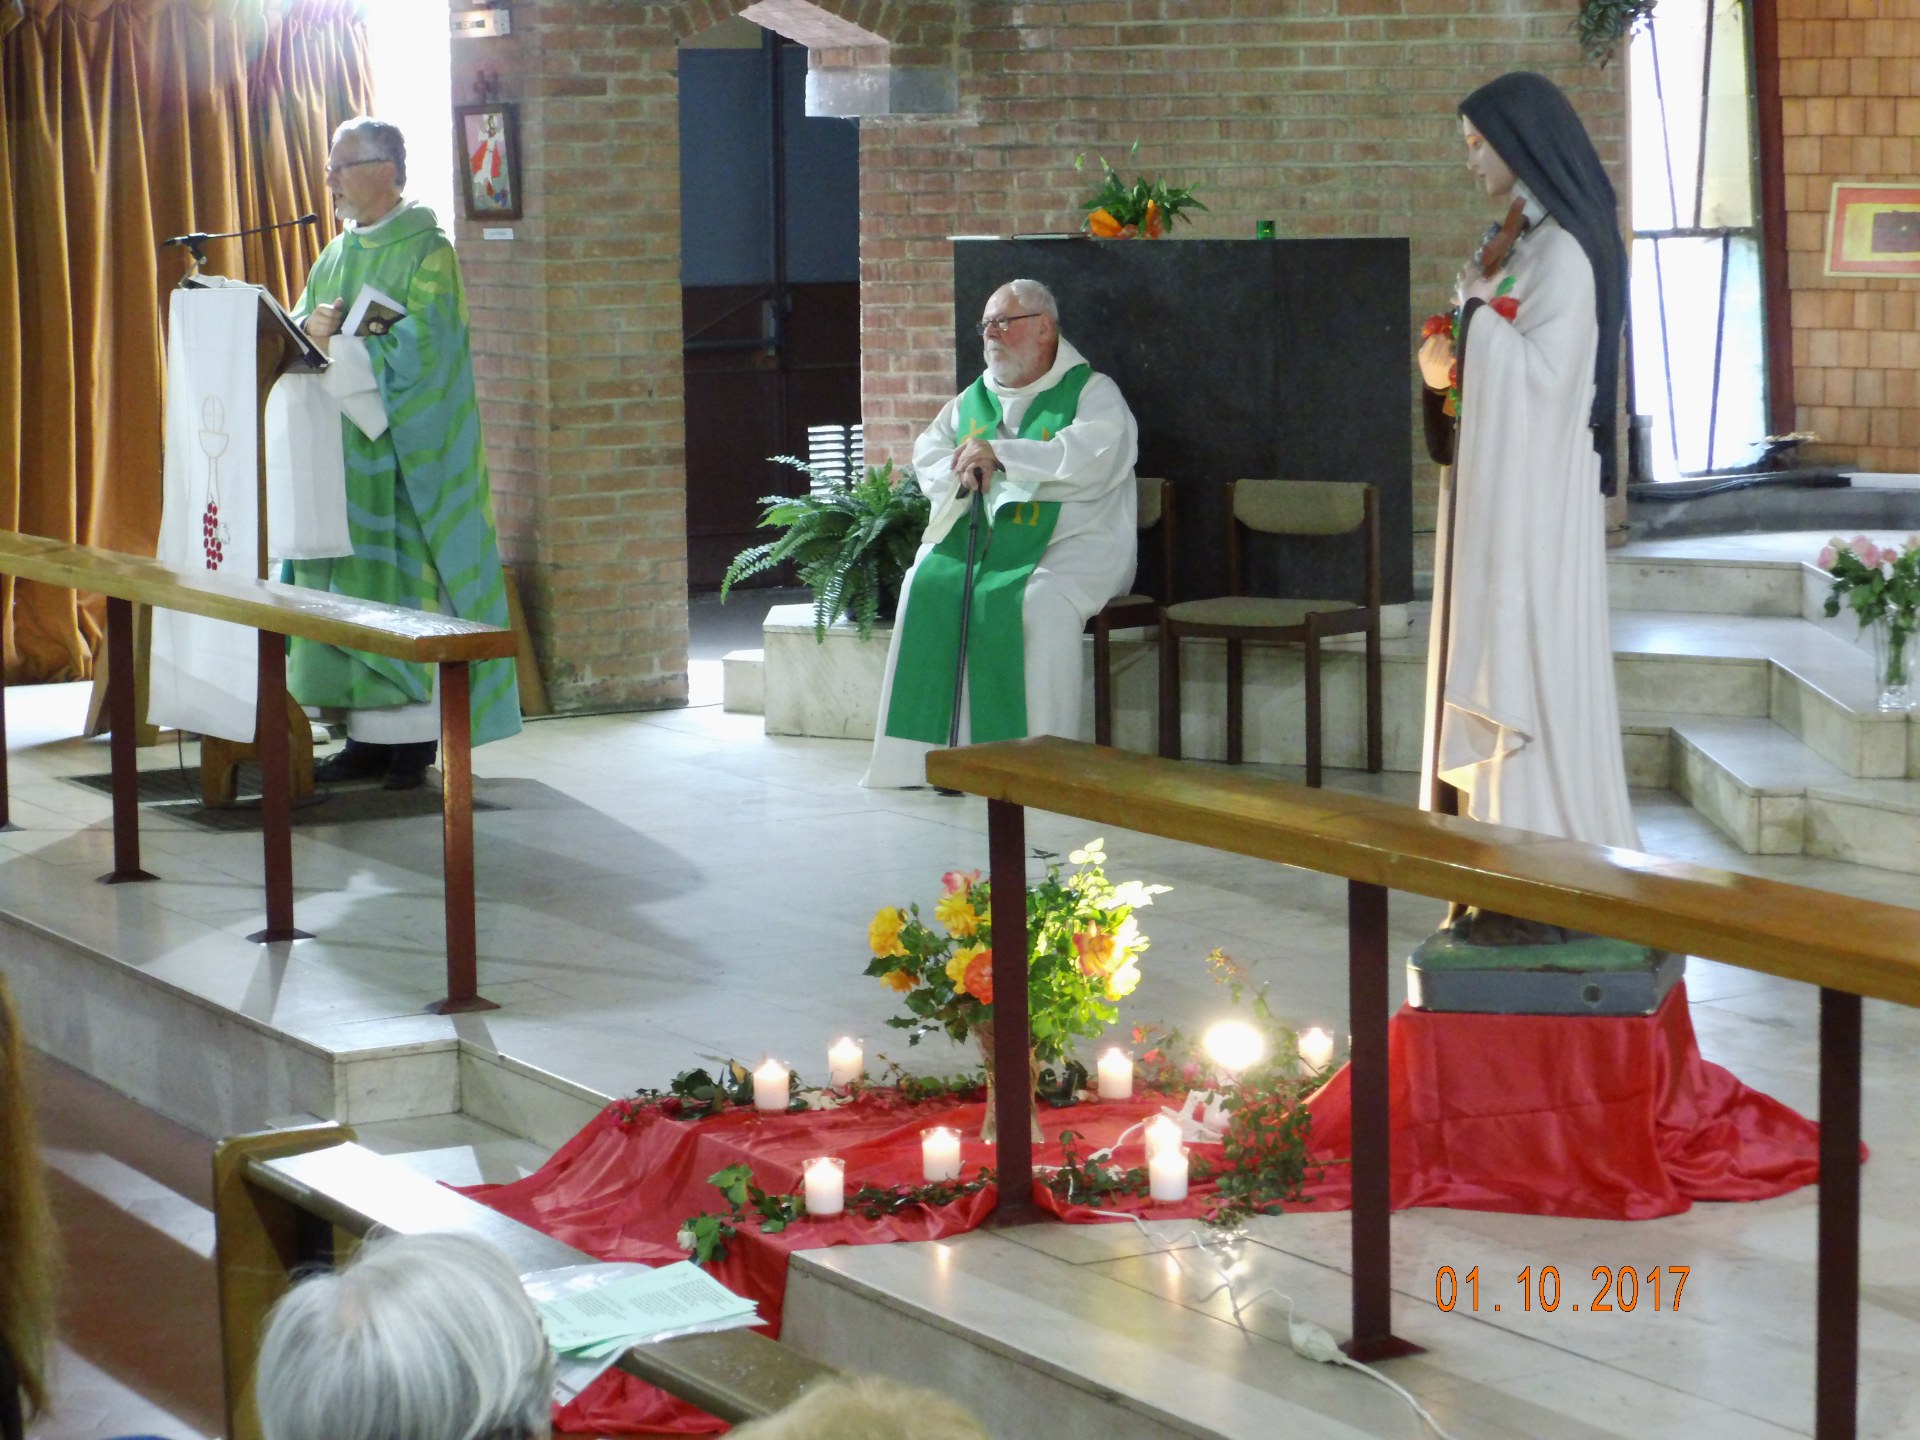 1-10-2017-Ste Therese (46)